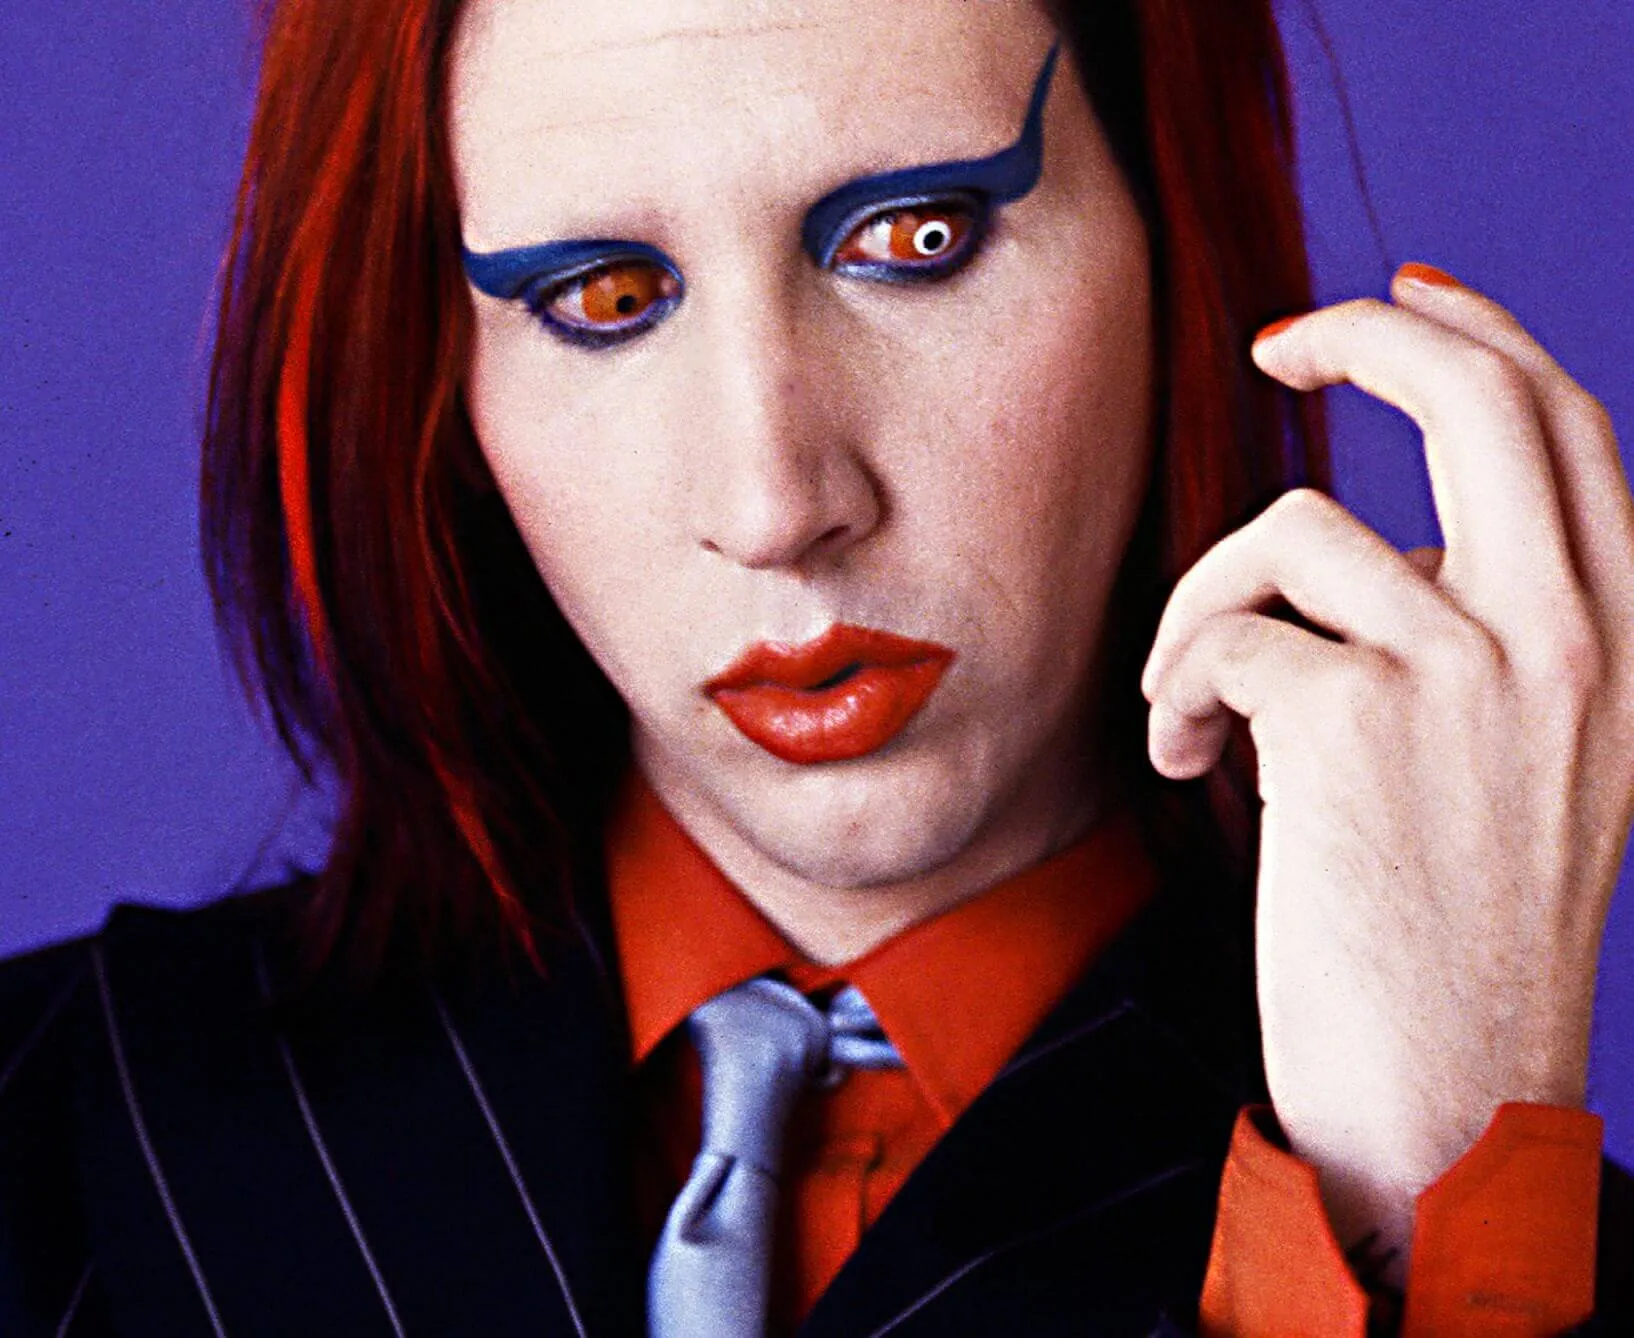 Marilyn Manson in a suit